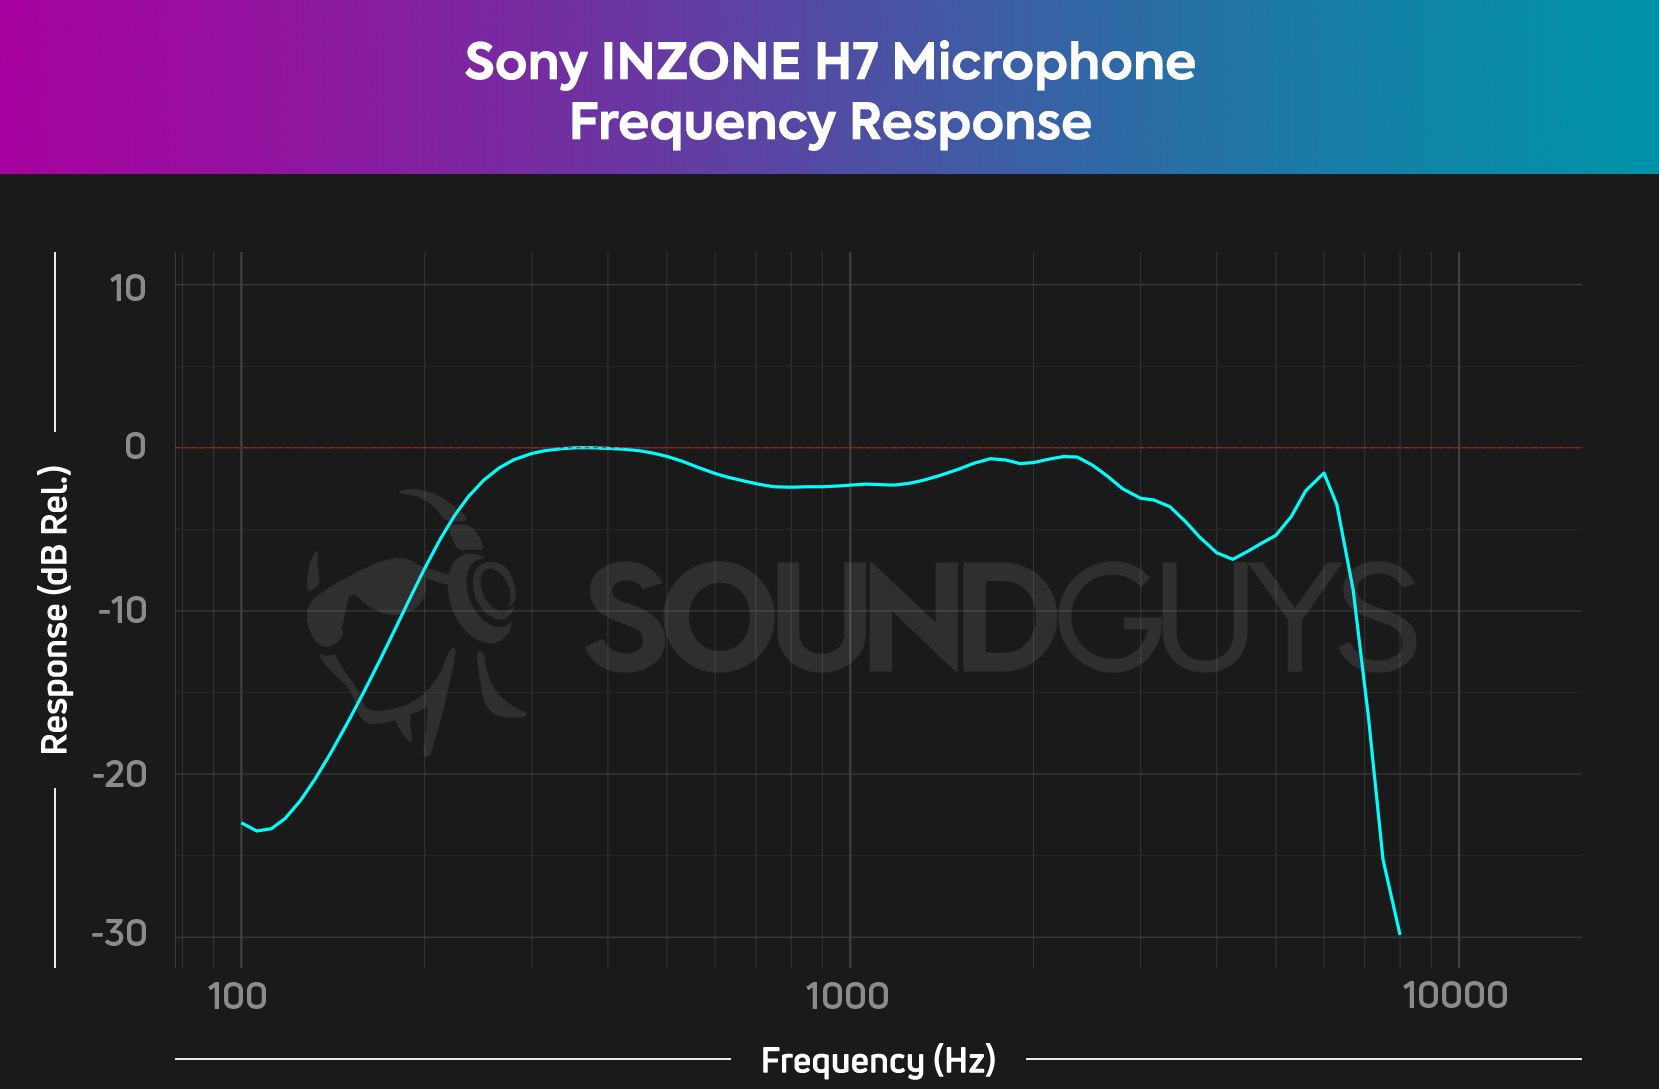 The Sony INZONE H7 microphone frequency response curve, showing a lack of bass and high end response, but a fairly flat midrange response.